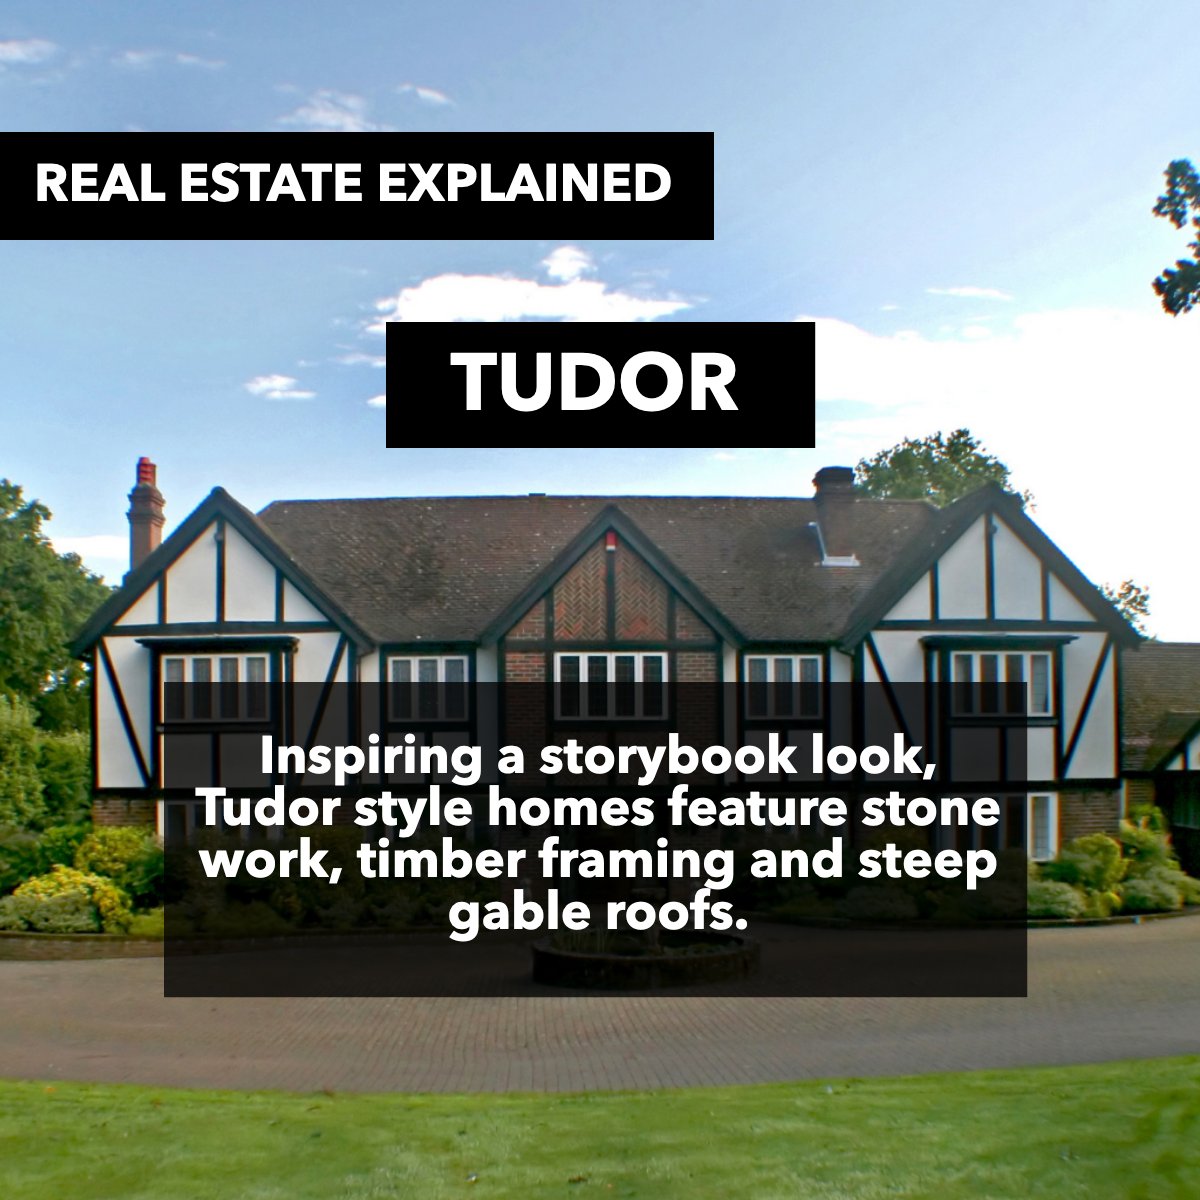 Charming, intricate, and classic, Tudor-style homes have been an iconic home style in North America since the 19th century. 🏘️ #tudorstylearchitecture #tudorstylehome #styletudors #RacingRealEstateAgent #BarrettRealEstate #StoneTreeRealEstateTeam